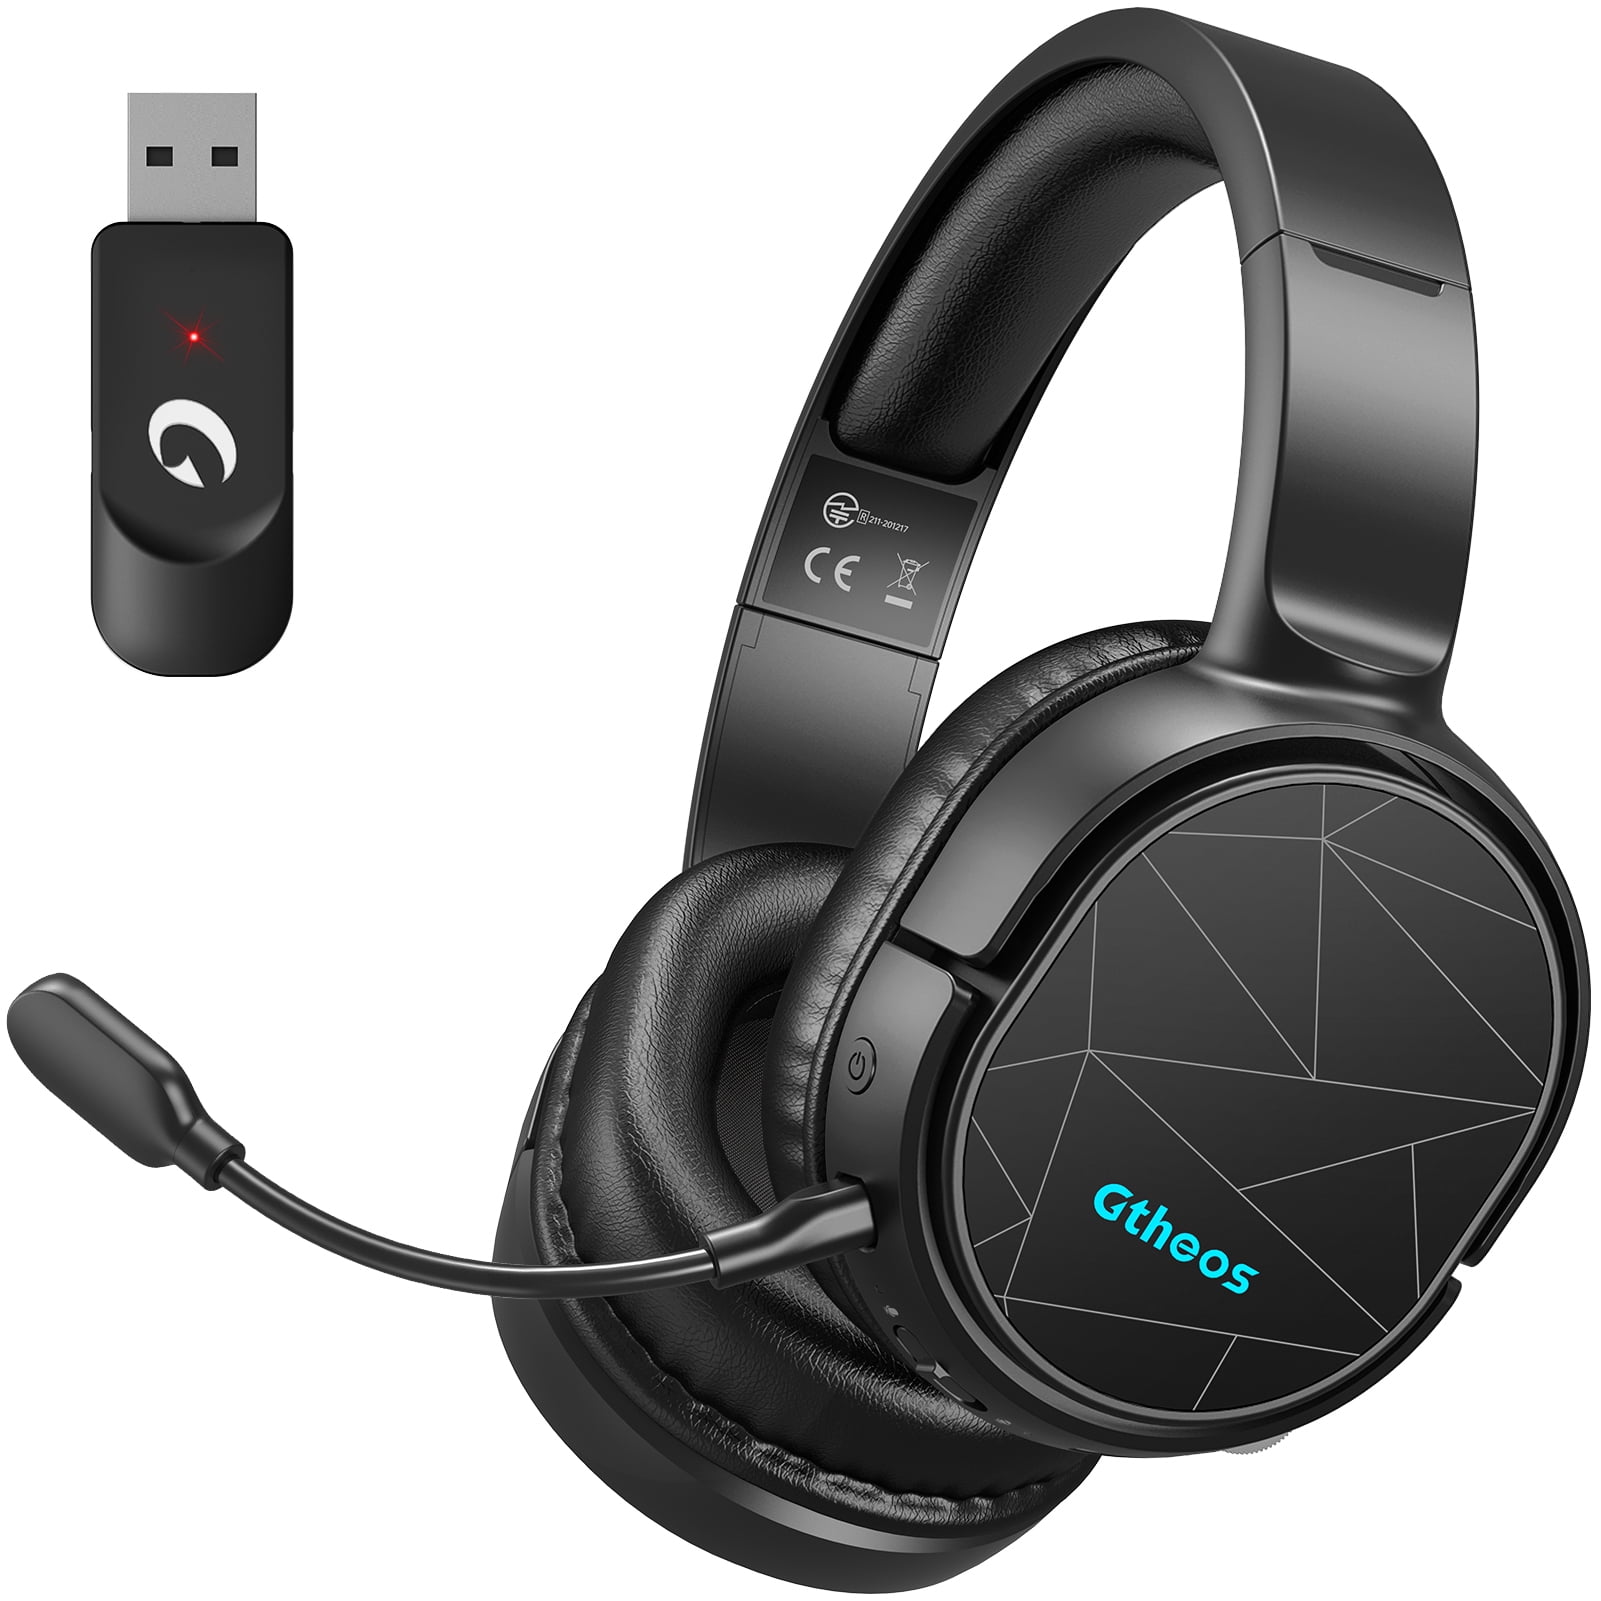 Hond Wierook Afdaling Gaming Headset, Gtheos Wireless Gaming Headset Lossless 2.4GHz for PC PS4  PS5, Bluetooth Gaming Headphones with Detachable Noise Canceling  Microphone, 7.1 Surround Sound, 30H Long Lasting Battery - Walmart.com